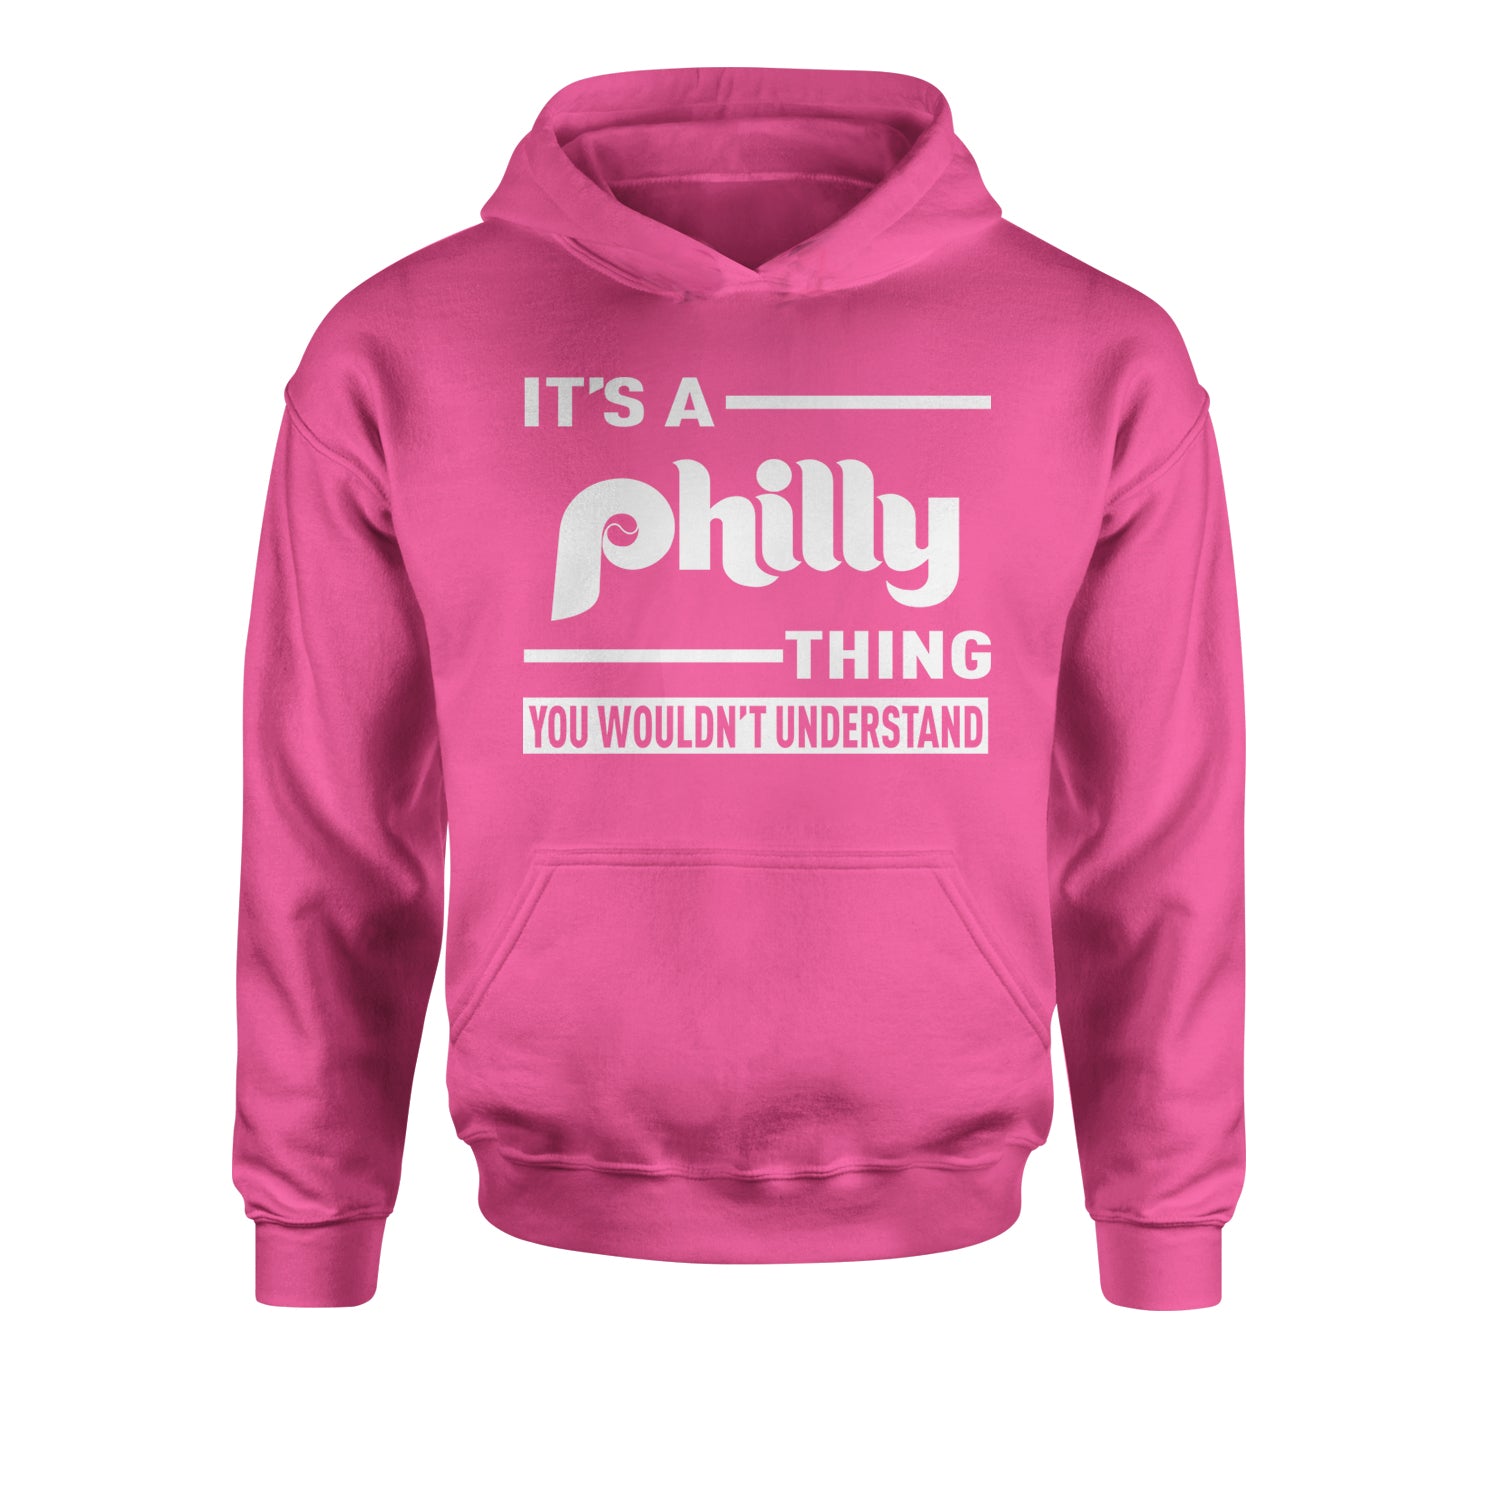 It's A Philly Thing, You Wouldn't Understand Youth-Sized Hoodie baseball, filly, football, jawn, morgan, Philadelphia, philli by Expression Tees